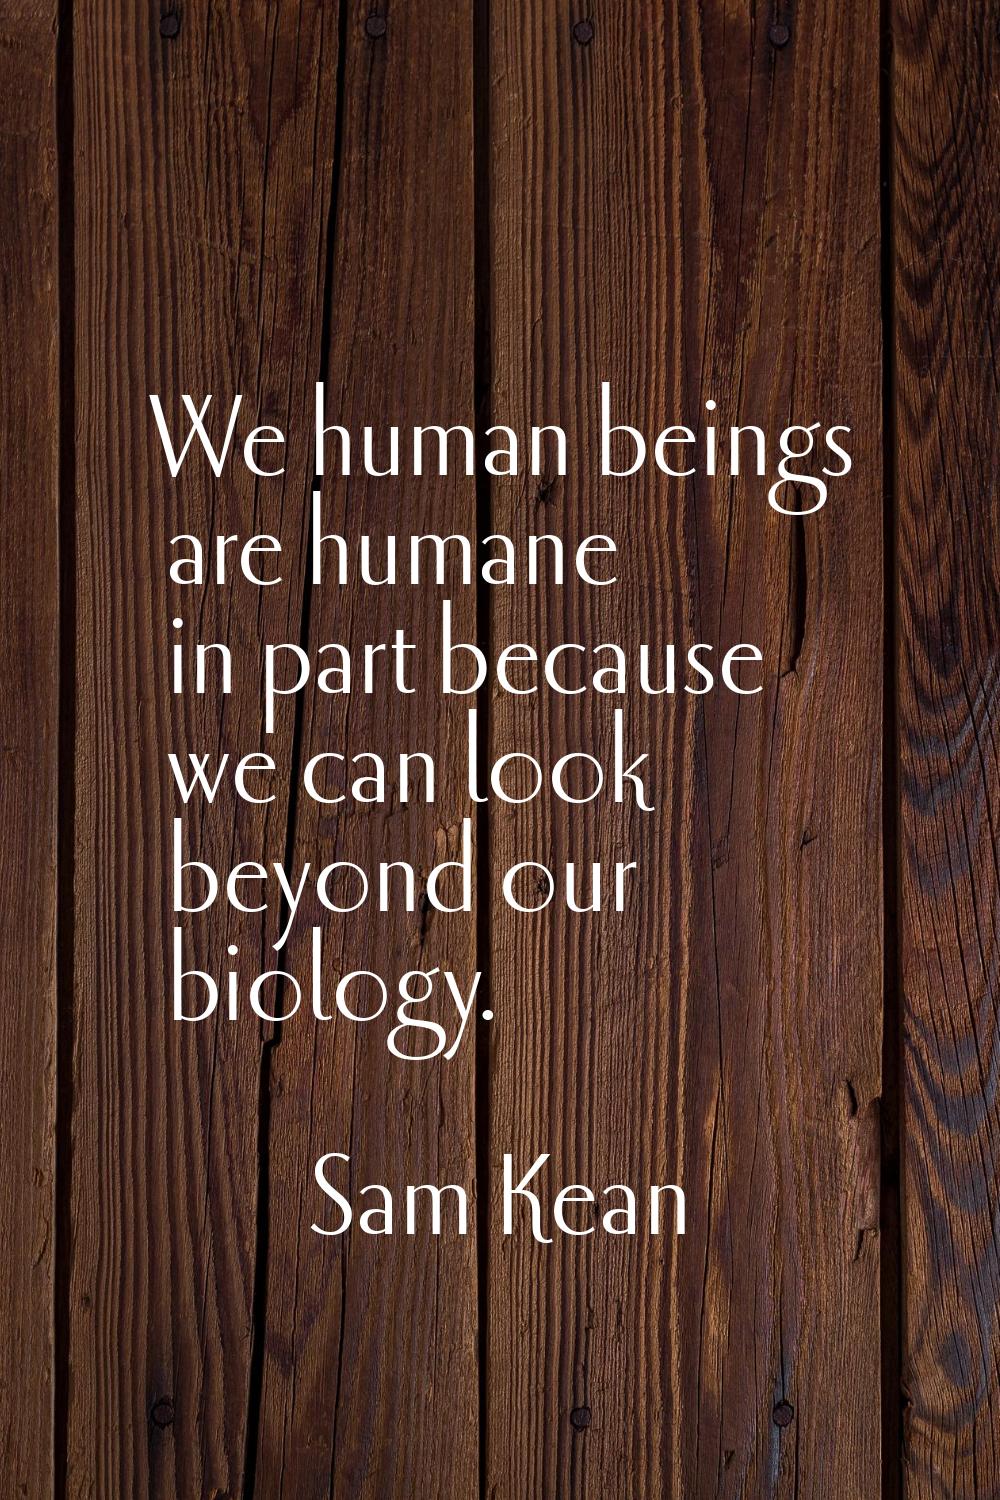 We human beings are humane in part because we can look beyond our biology.